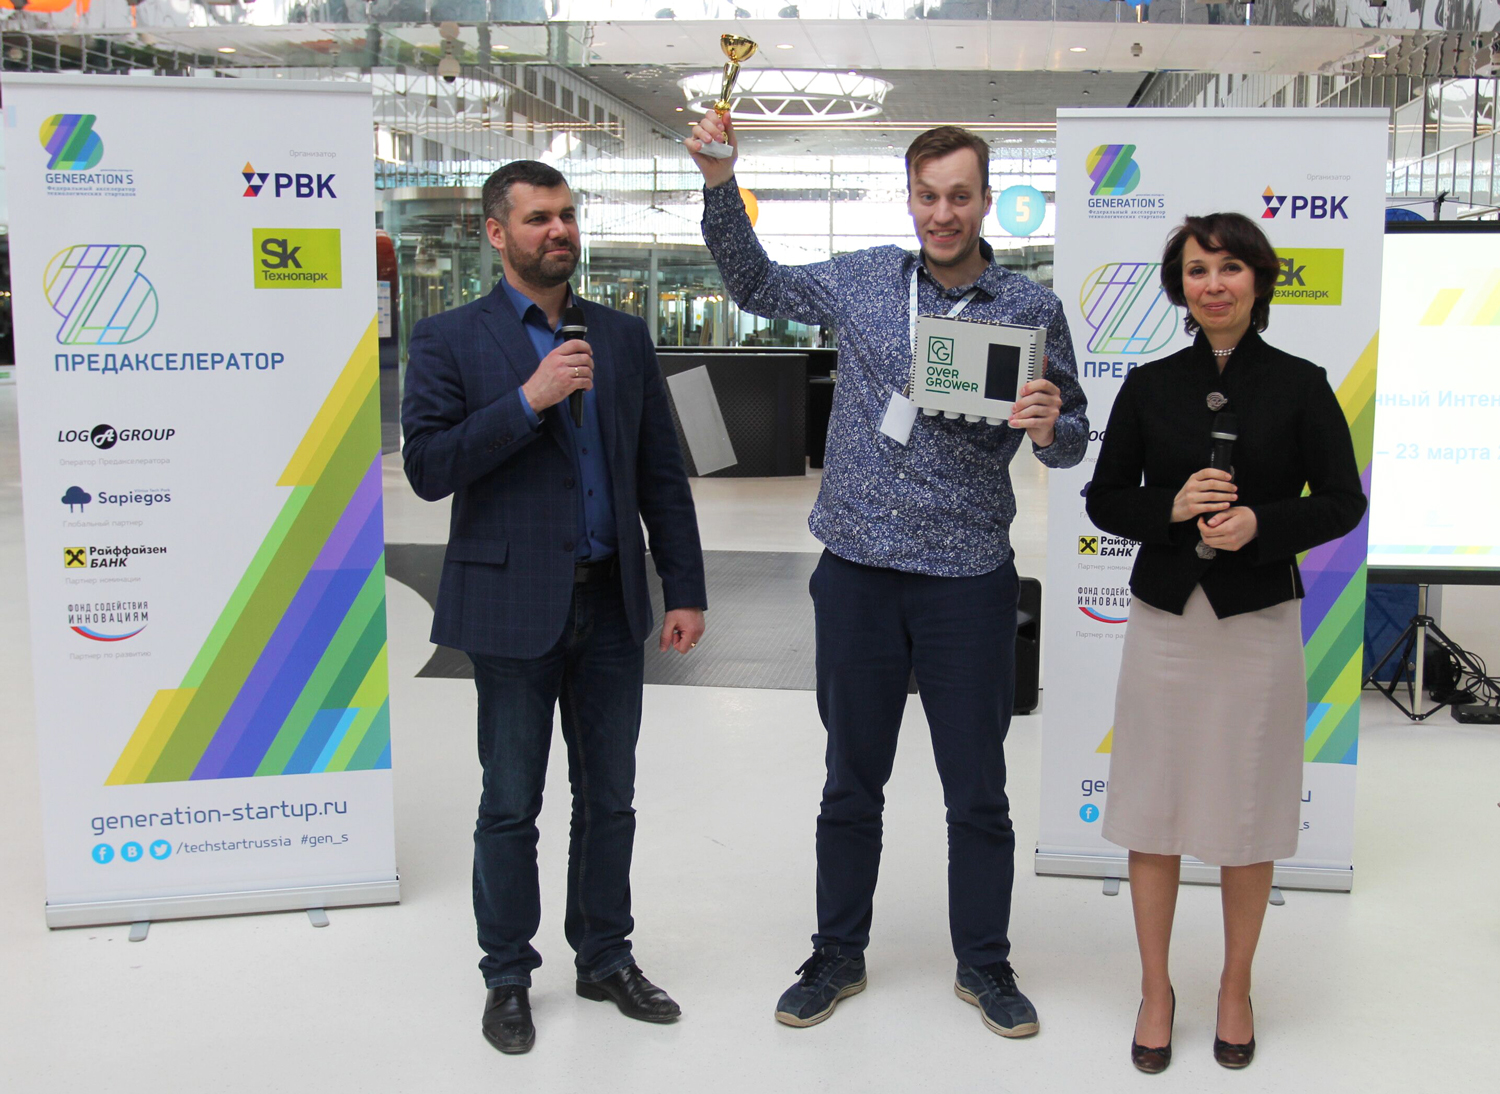 Mr Roman Rybakov Awarding of “The Most Active Project” Cup